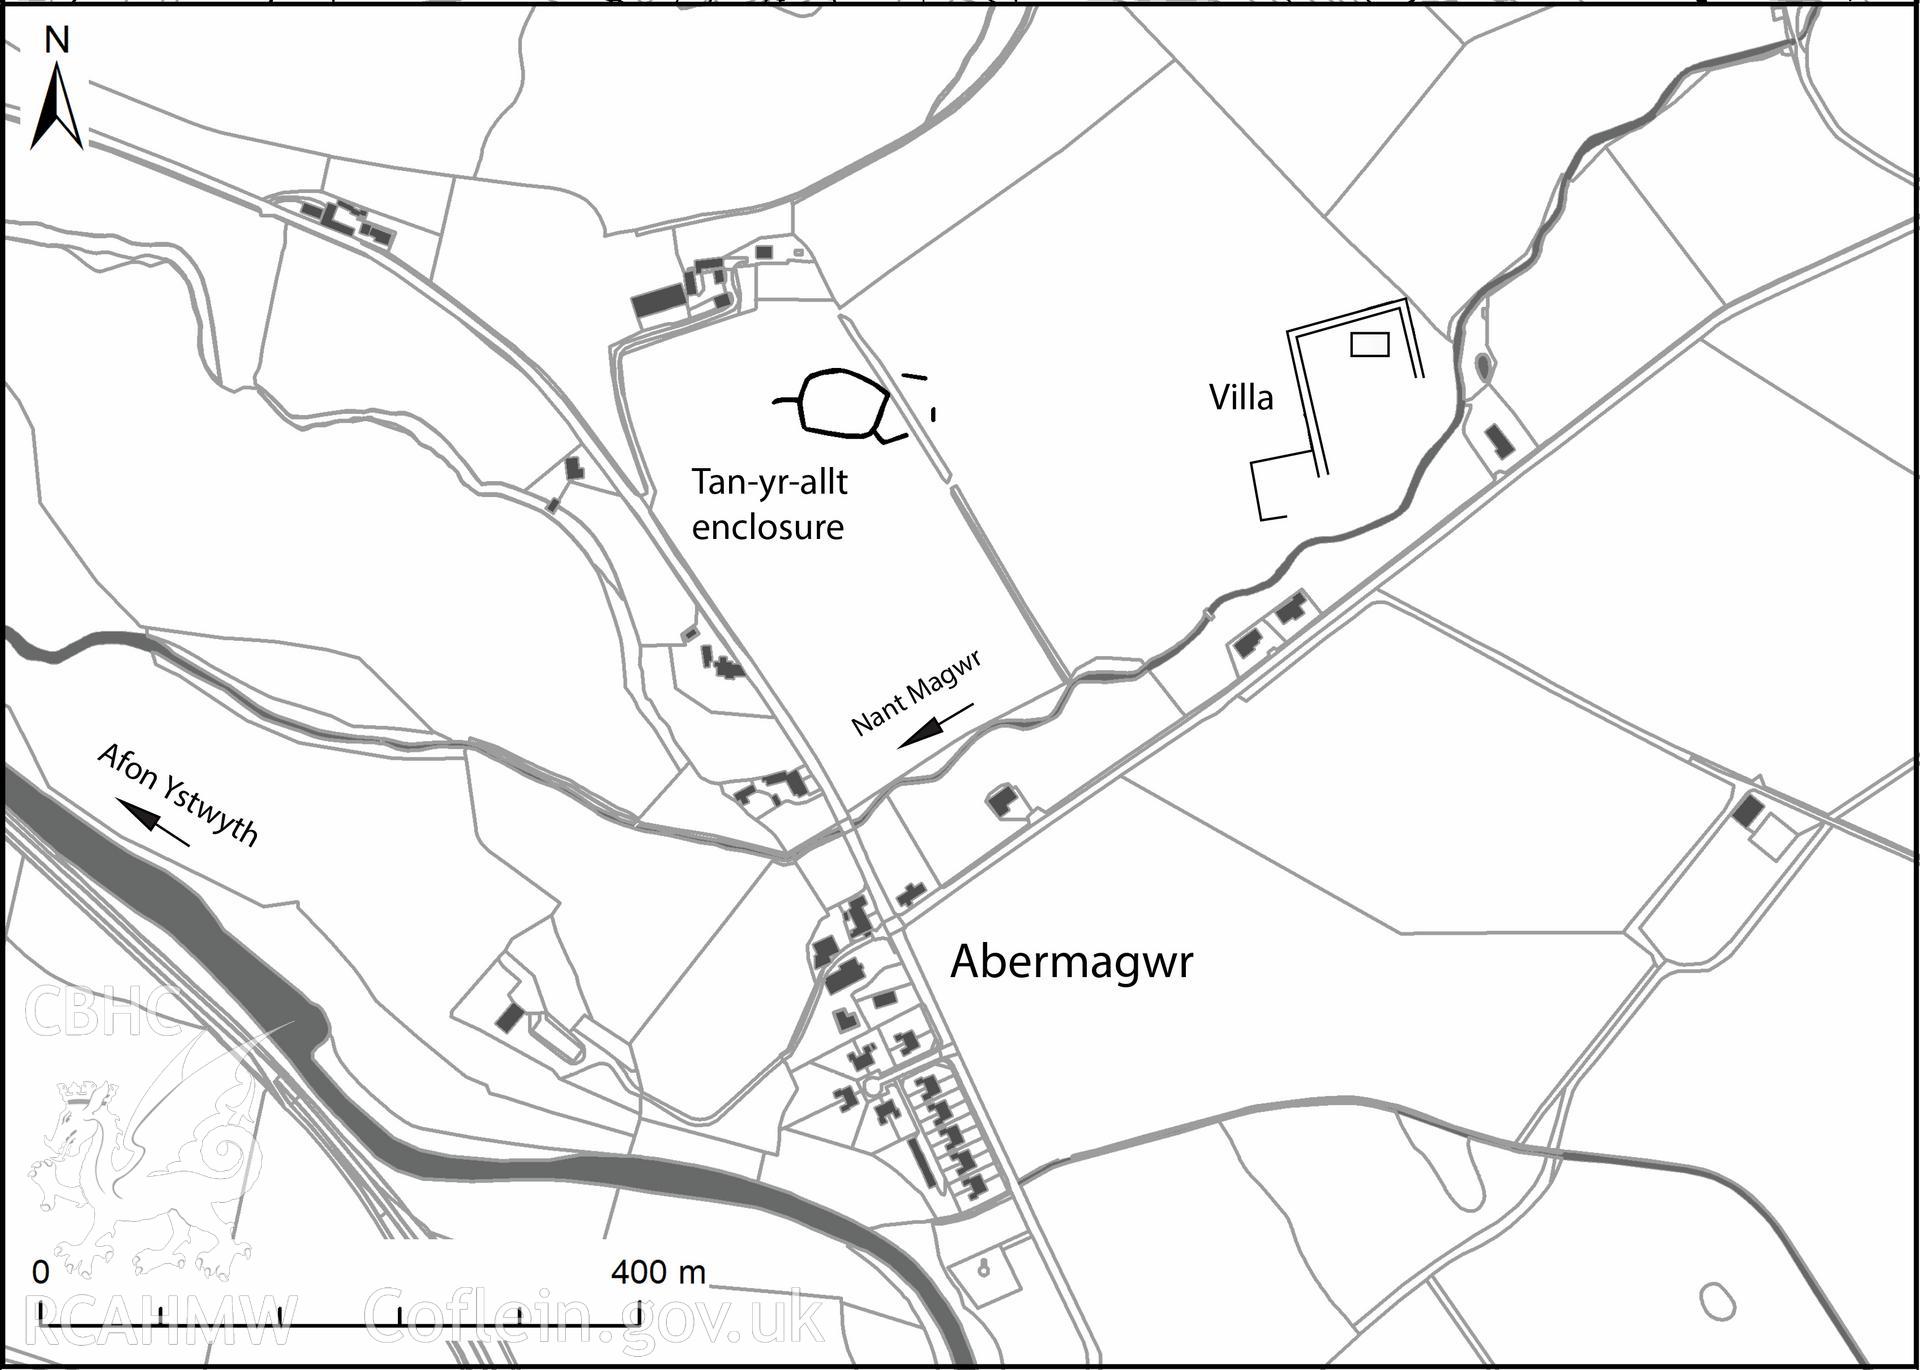 Arch Camb 167 (2018) 143-219. "The Romano-British villa at Abermagwr, Ceredigion: excavations 2010-2015" by Davies and Driver. Fig 2 detailed location map